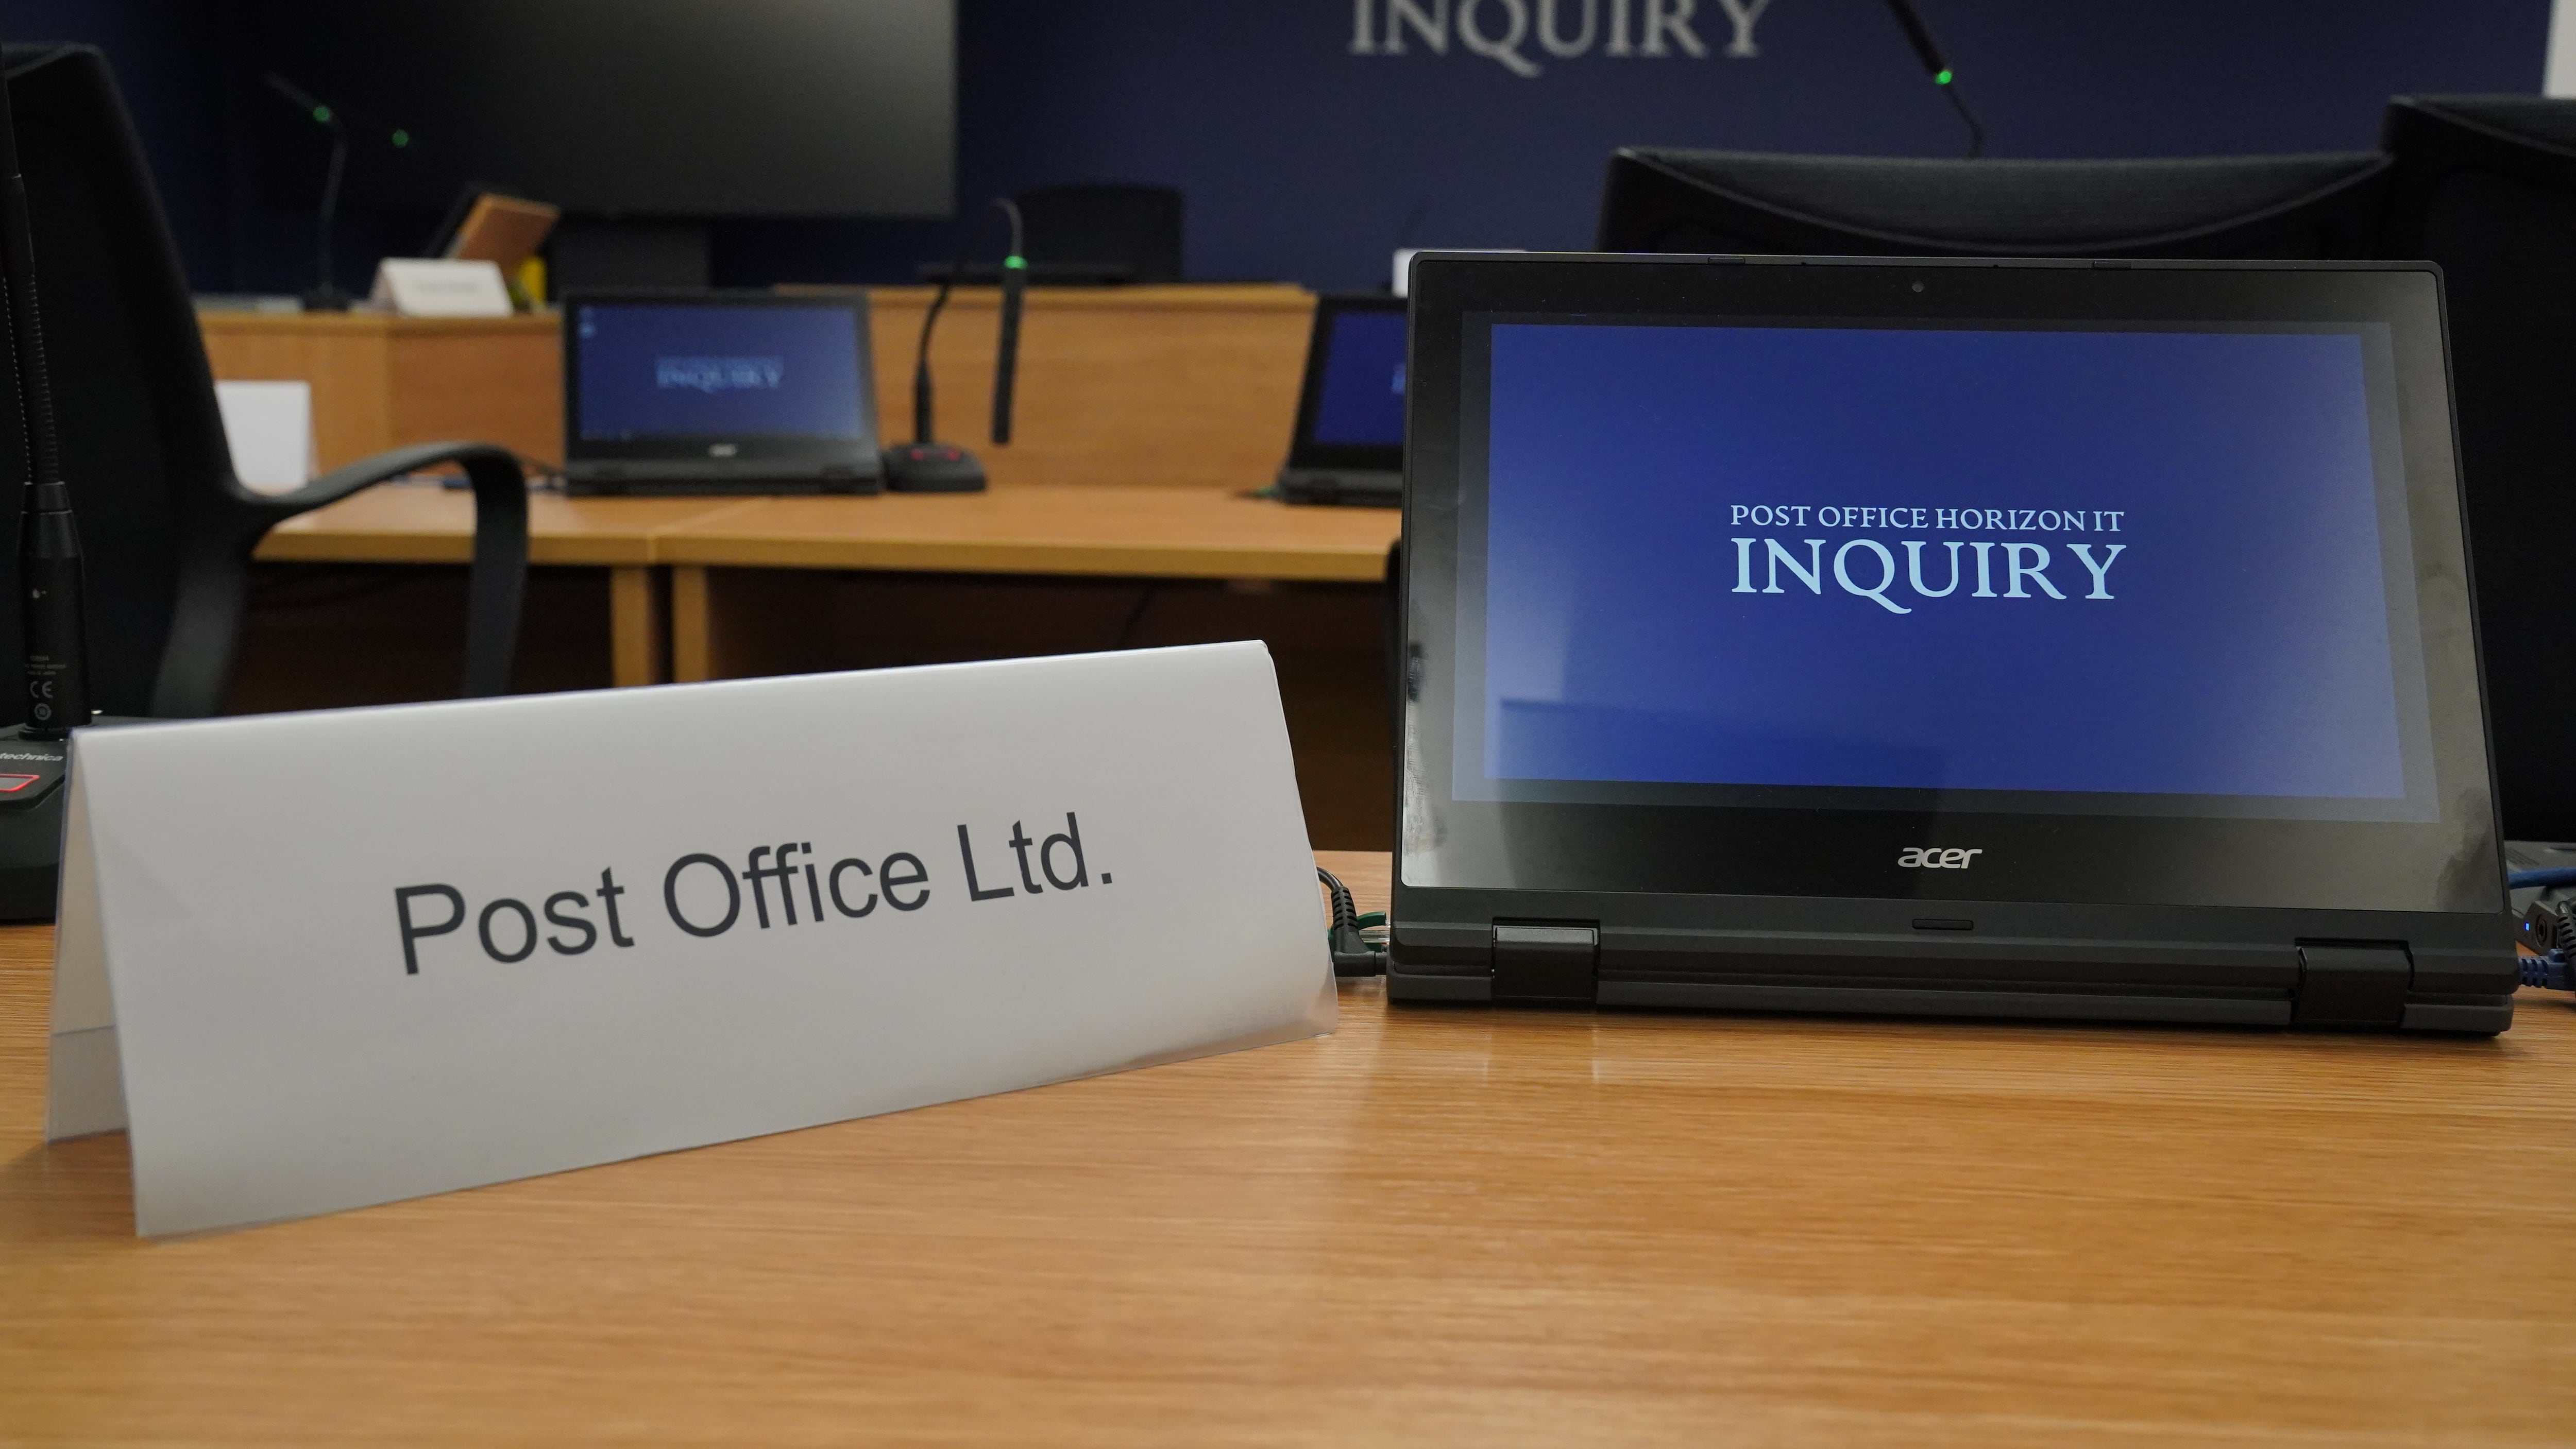 The inquiry is being held at Aldwych House in central London